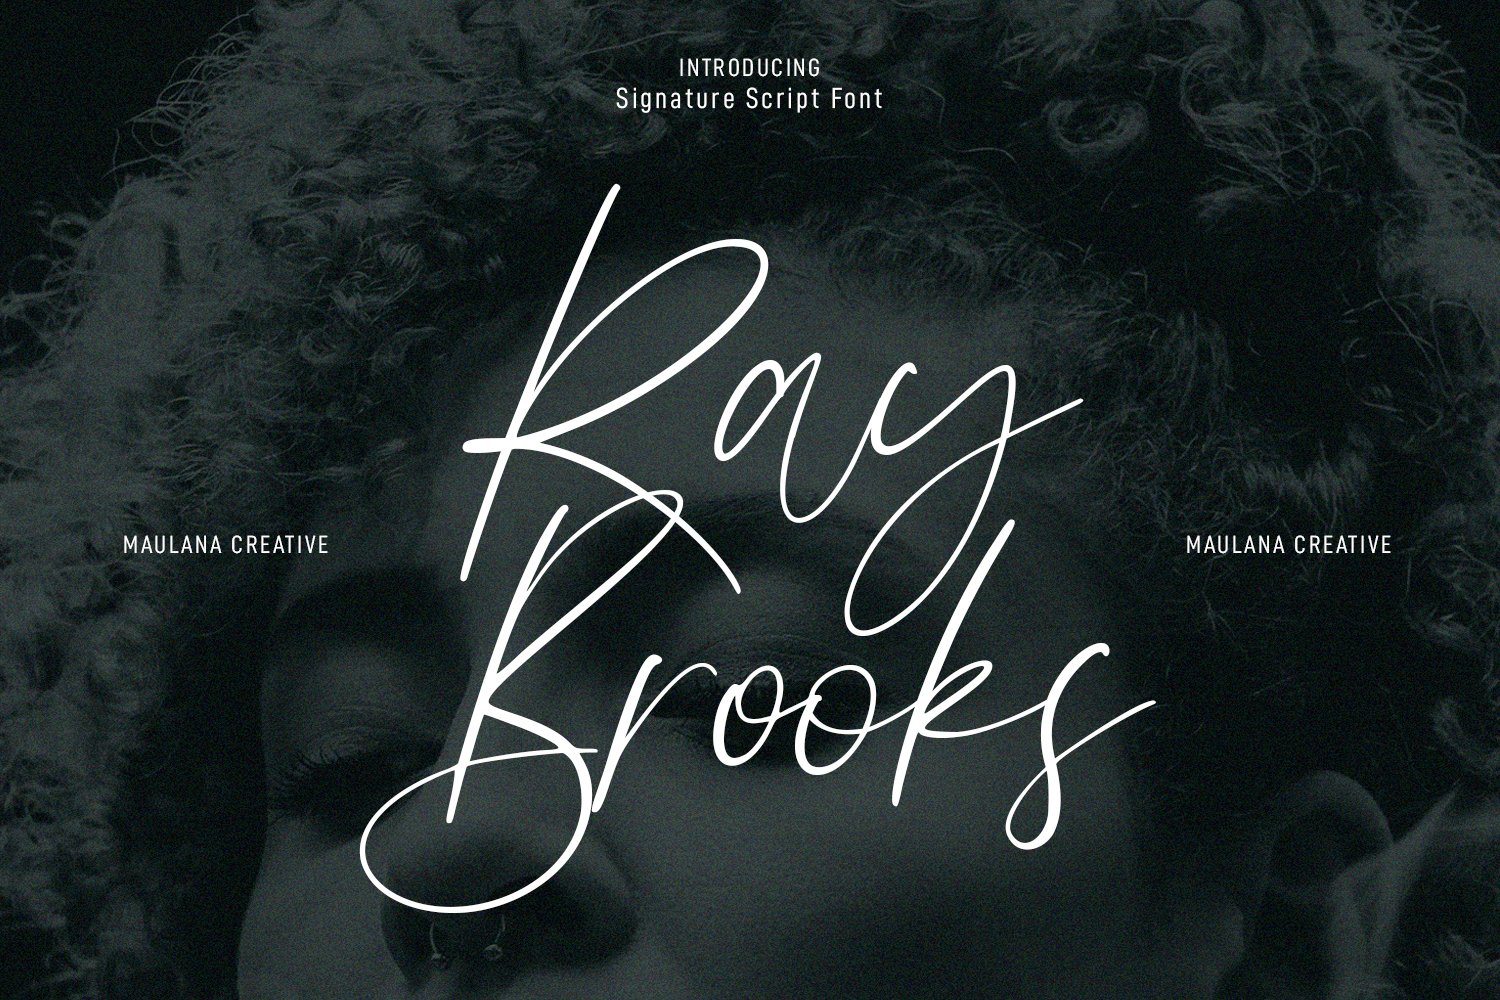 Ray Brooks Script Font cover image.